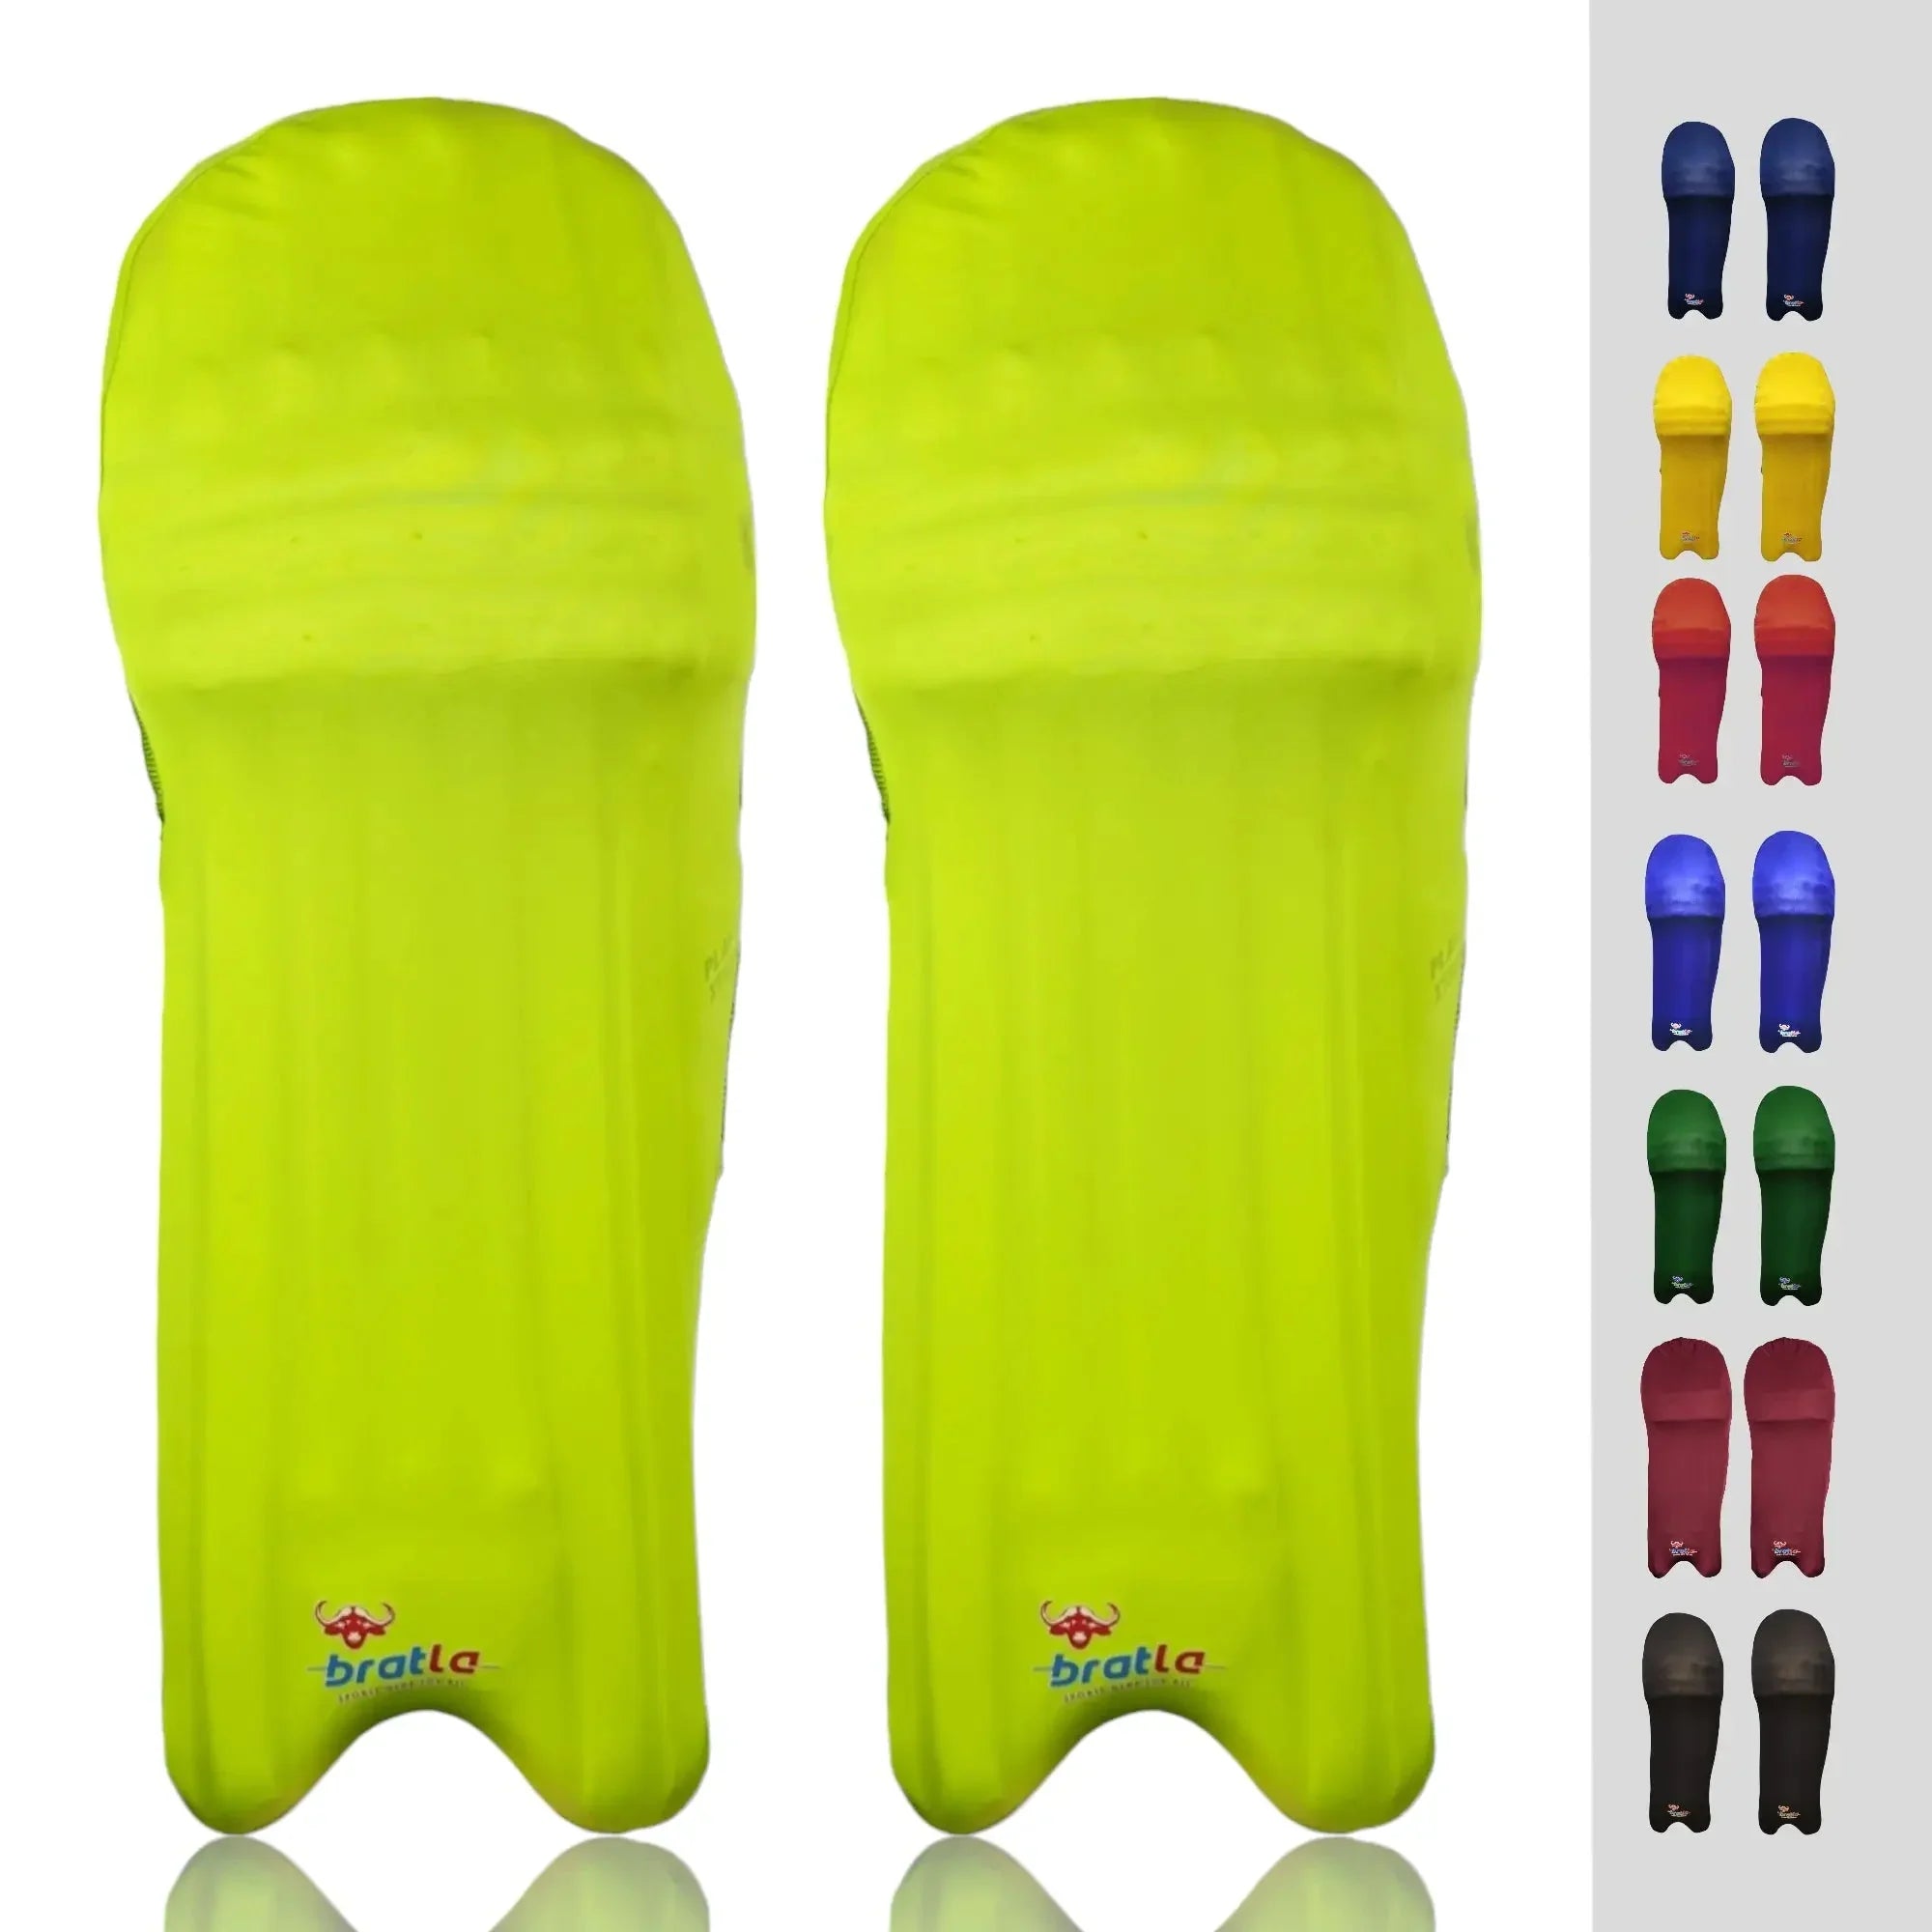 Bratla Cricket Batting Pad Covers Fit Neatly Easily Put On - Lime Green - PADS - BATTING COVER